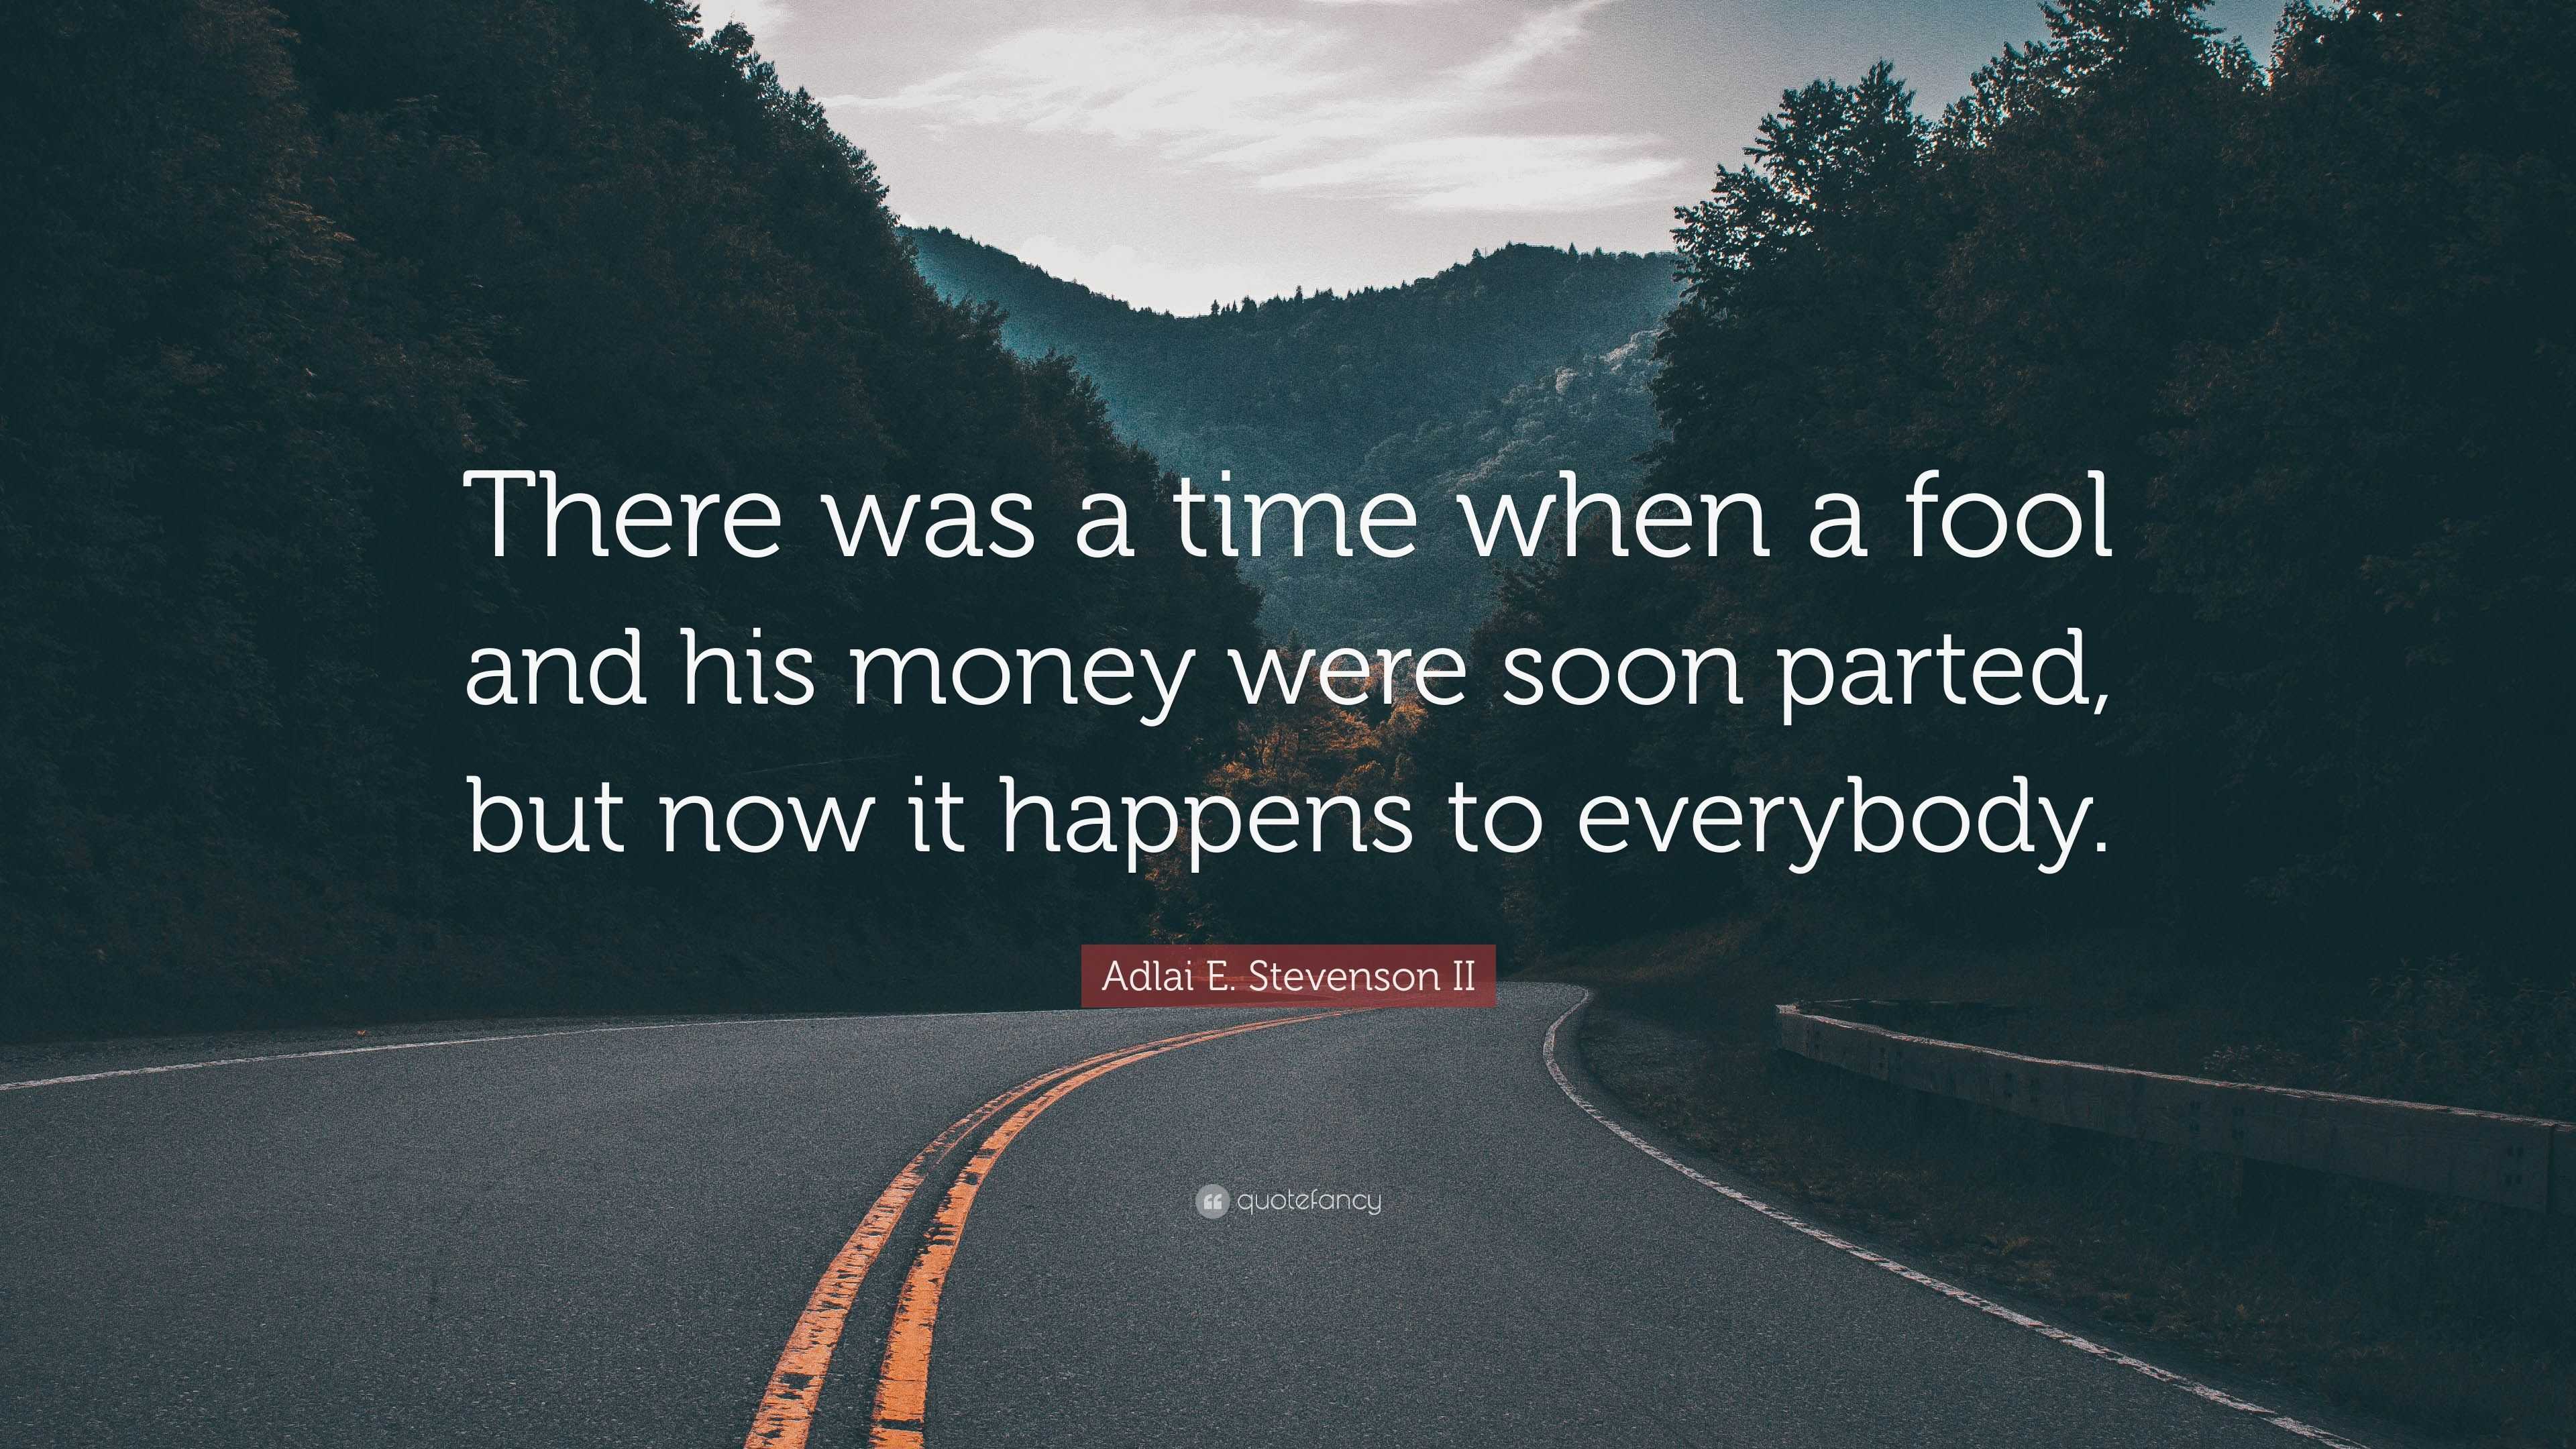 There was a time when a fool and his money were soon parted, but now it hap...